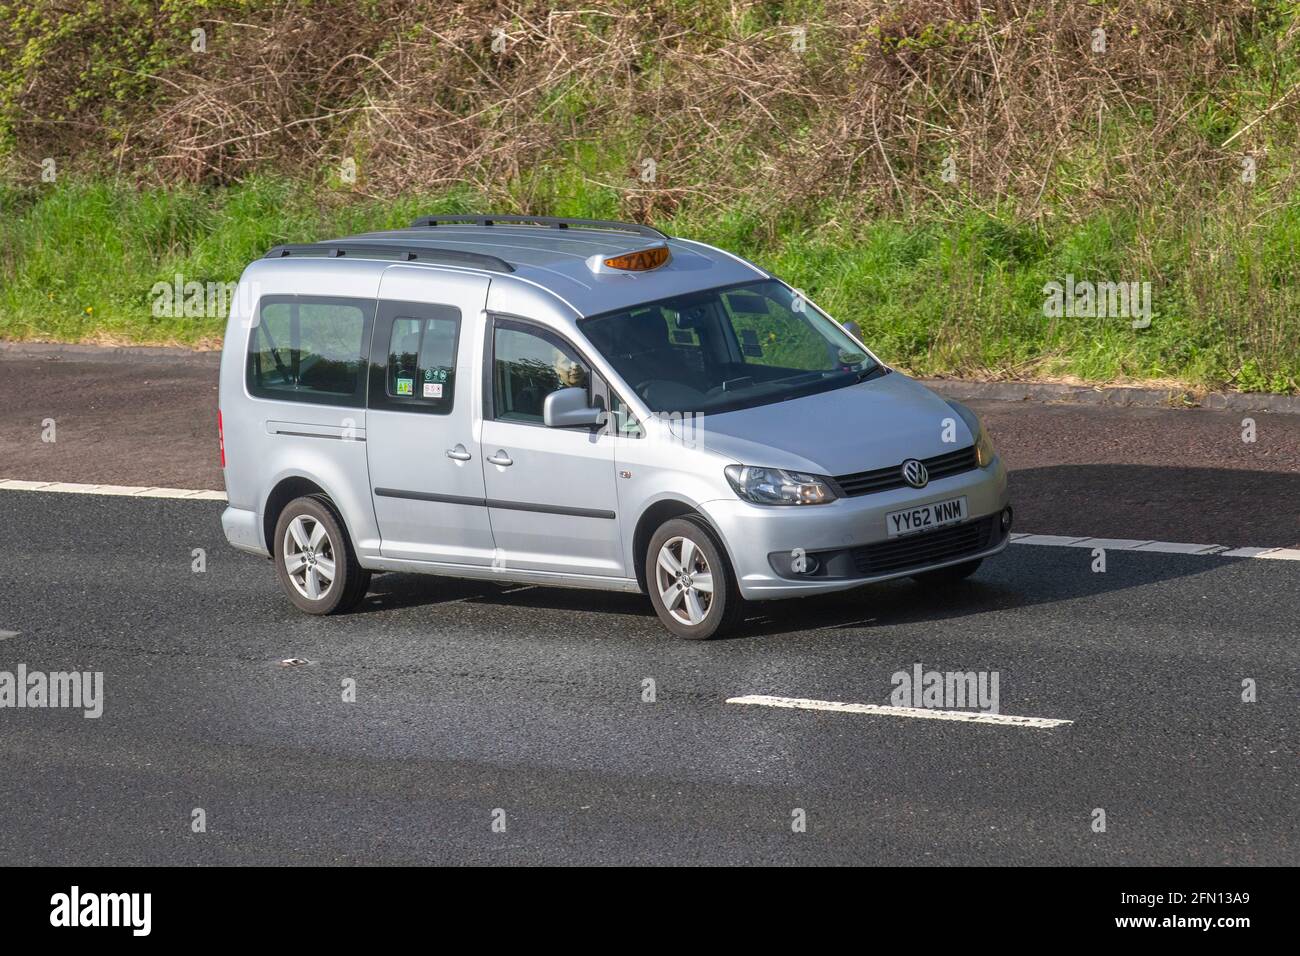 2013 silver VW Volkswagen Caddy Maxi C20 Life Tdi S-A;Vehicular traffic, moving vehicles, cars, Taxi vehicle driving on UK roads, motors, motoring on the M6 motorway highway UK road network. Stock Photo